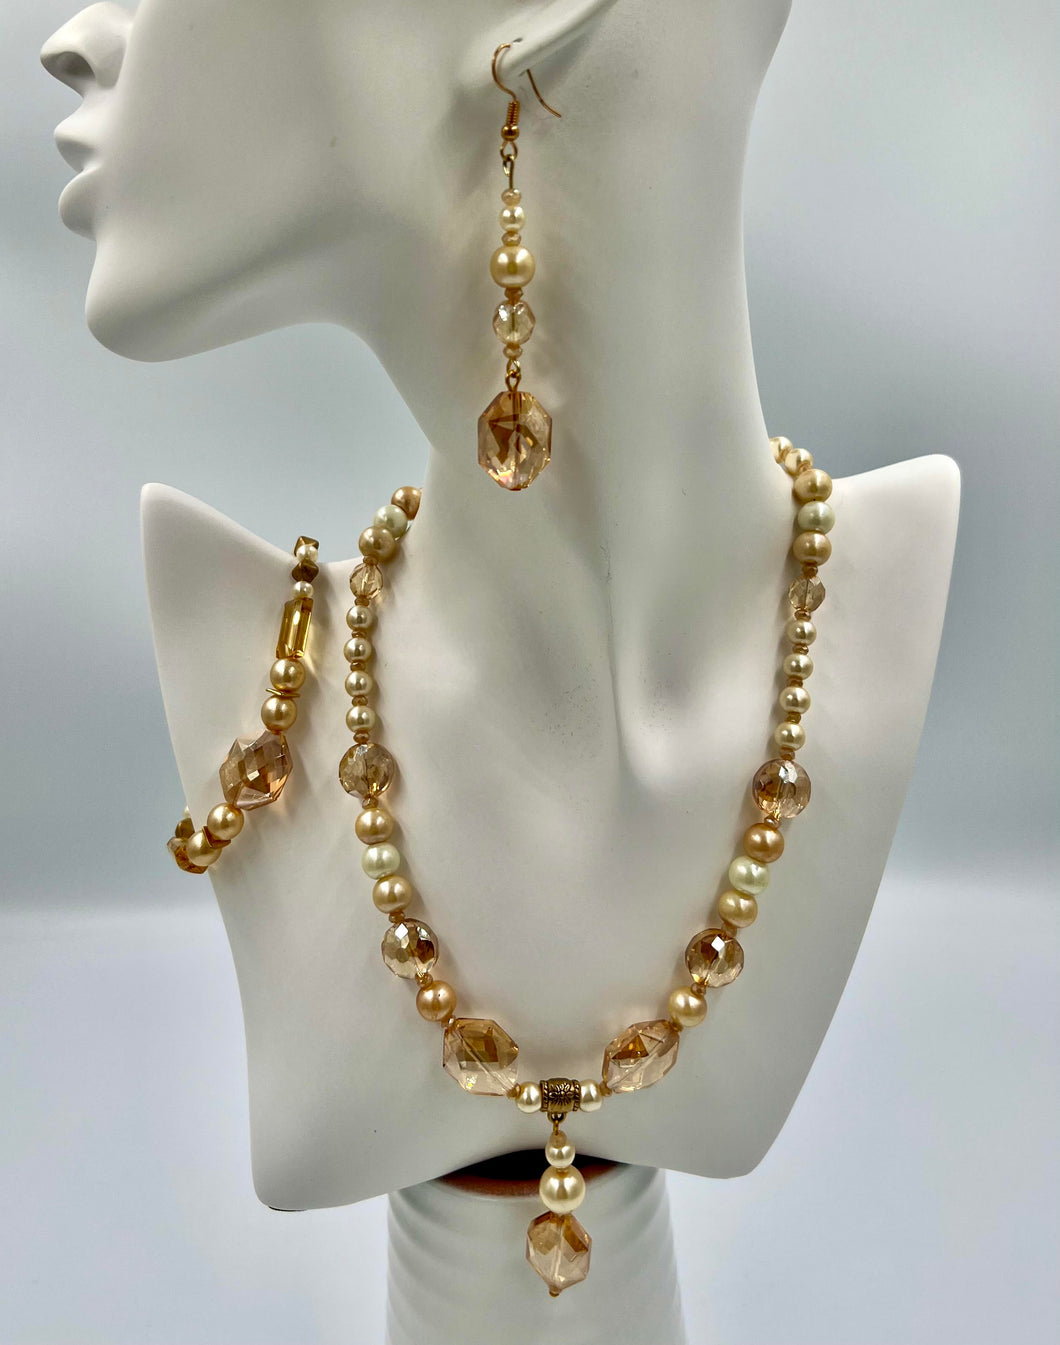 Champagne and Crystal Jewelry Set